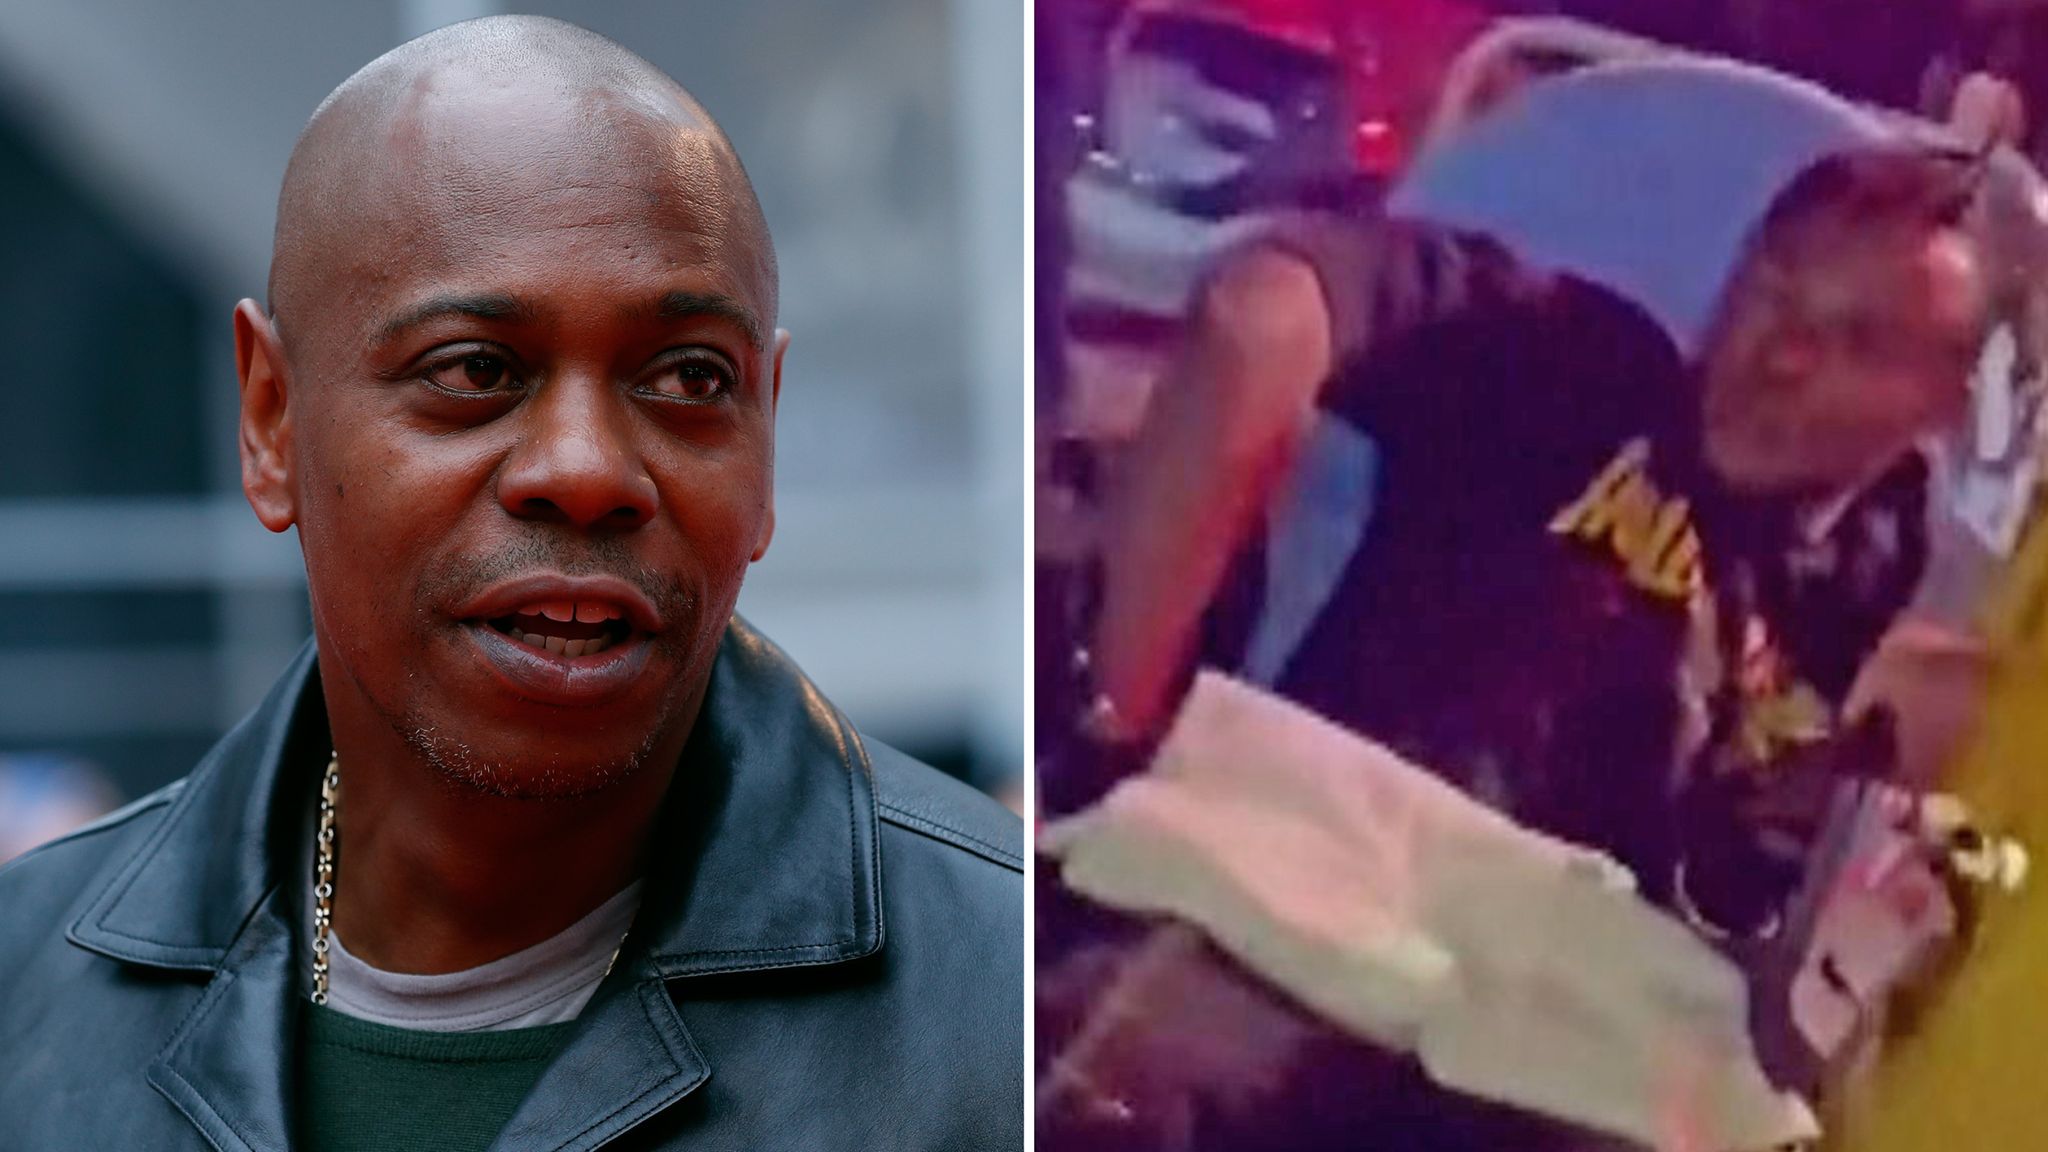 Netflix Is A Joke Festival: Comedian Dave Chappelle Attacked On Stage